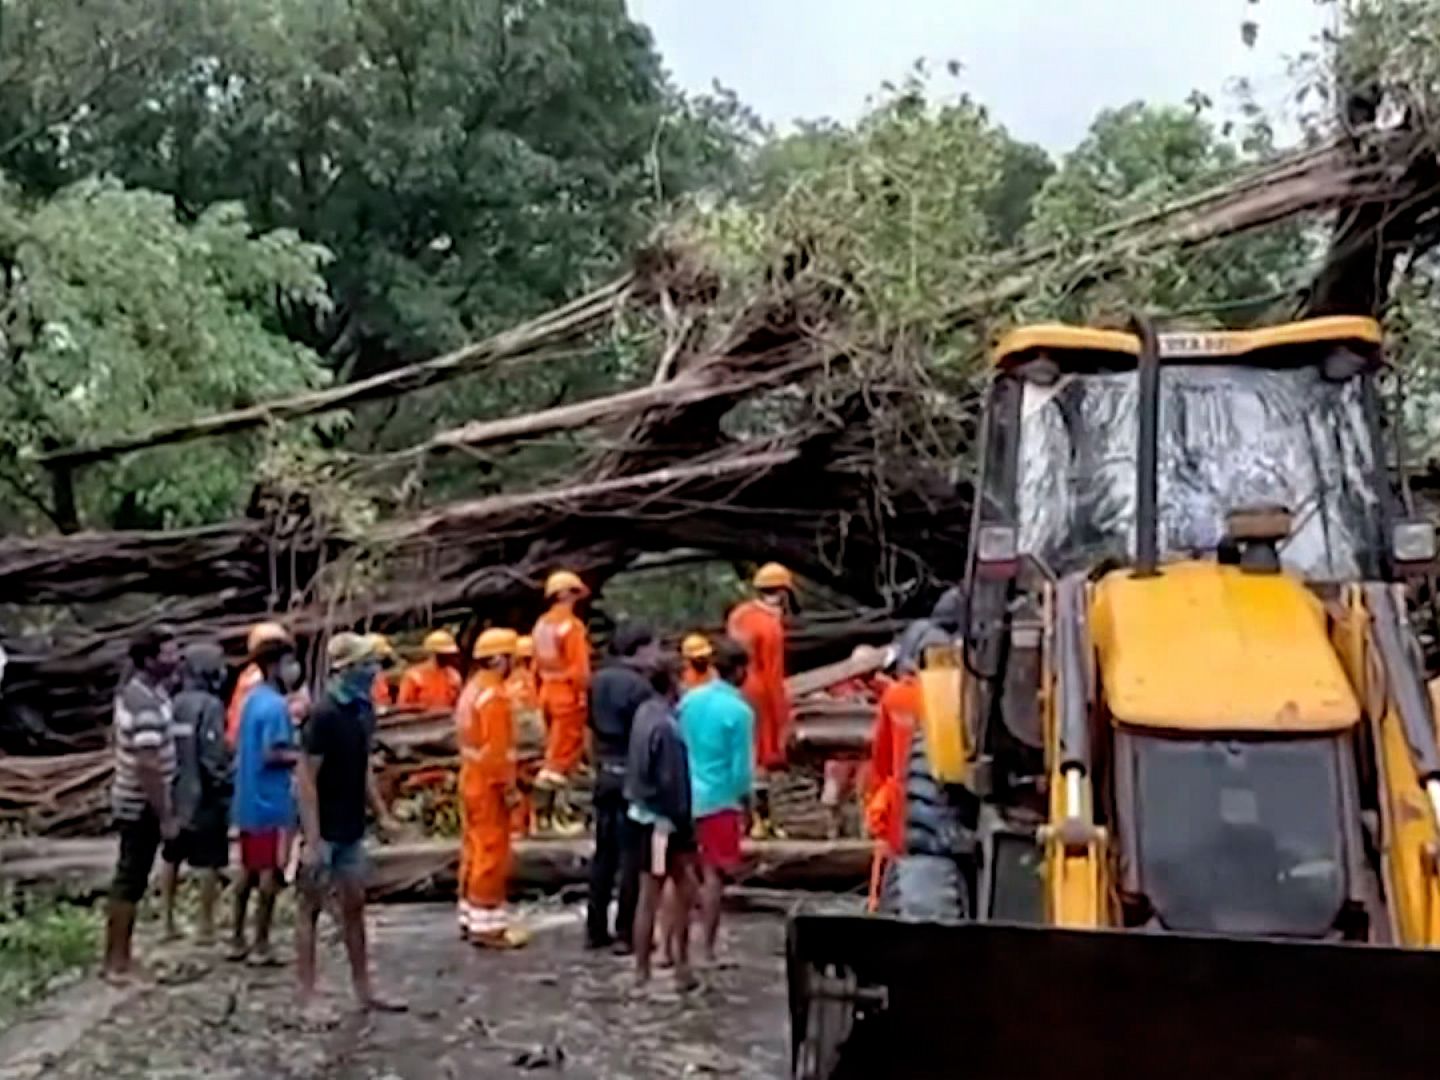 Cyclone Tauktae: India lashed by strongest storm to ever hit west coast as it reels from Covid | CNN